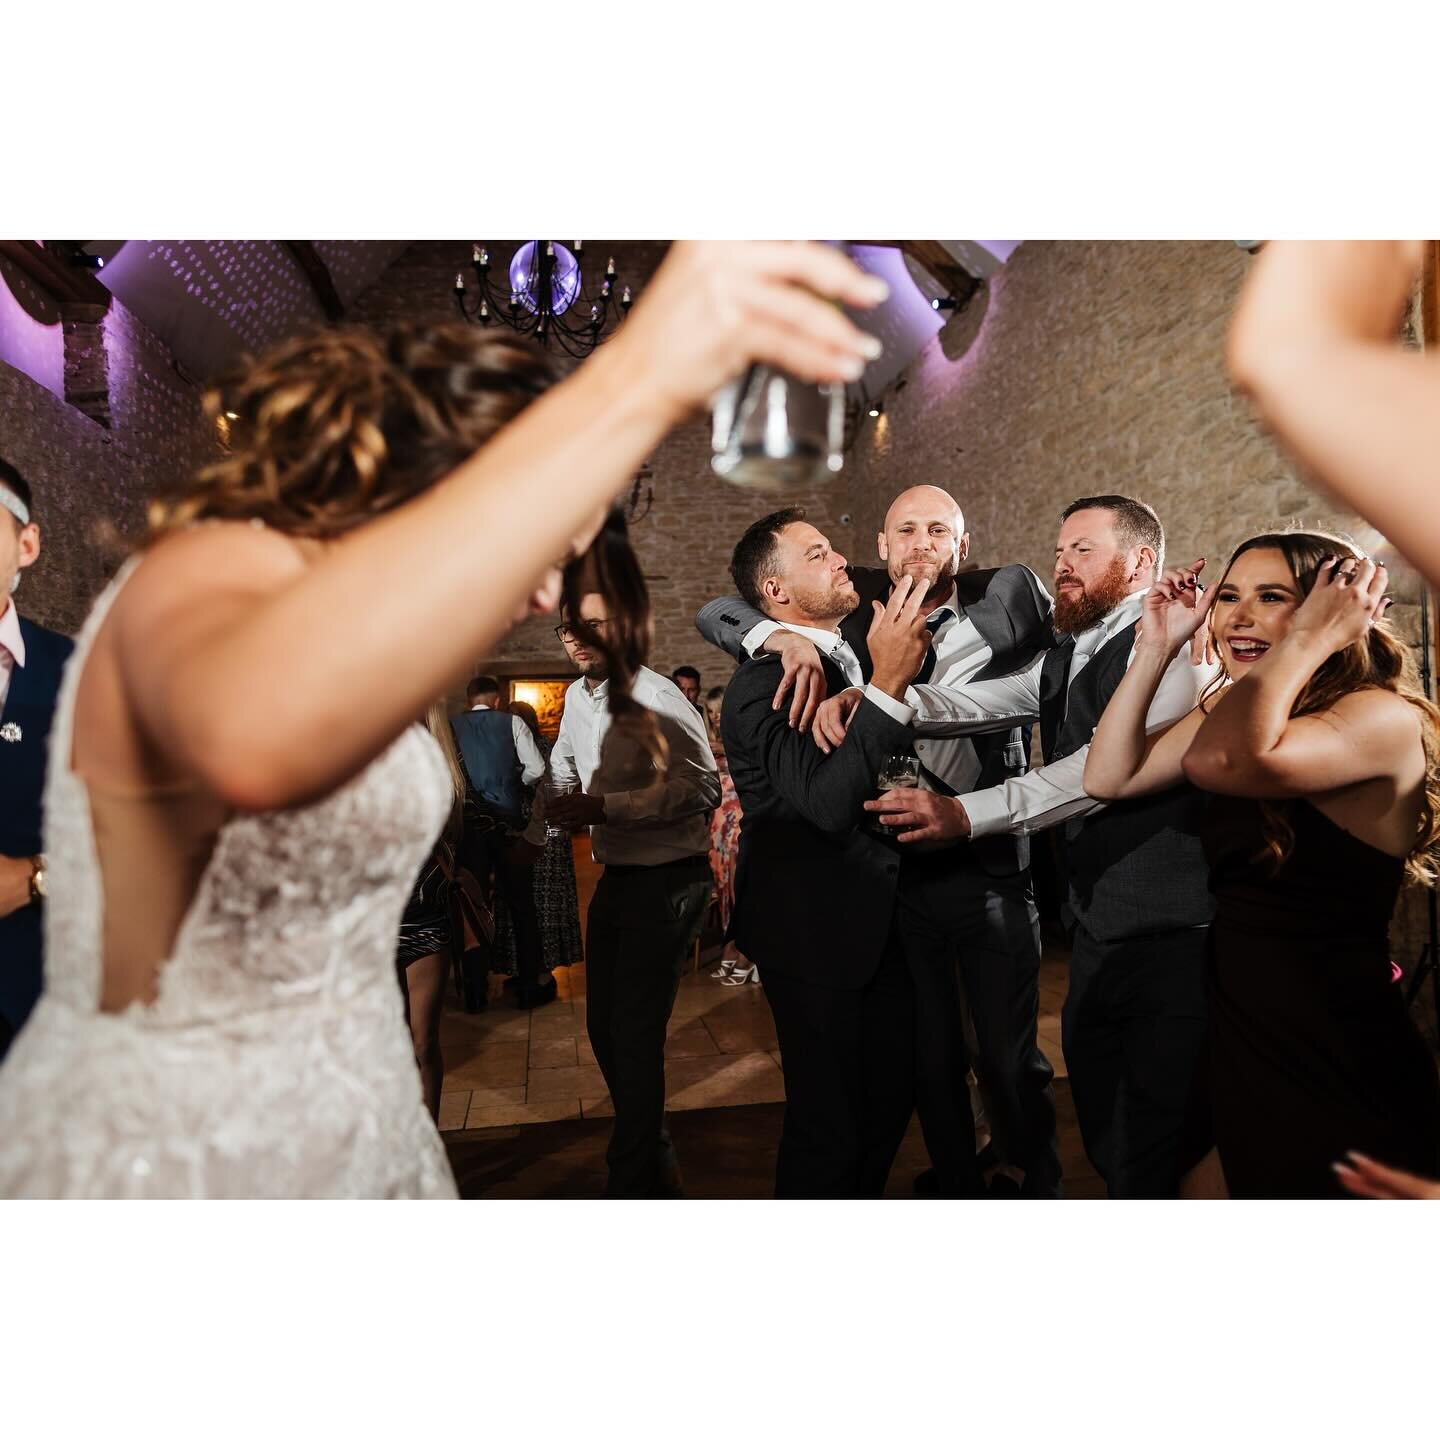 Dancing the night away after a day of sunshine and laughter surrounded by all your favorite people 💕🕺🏻

#kingscotebarn 
#kingscotebarnwedding 
#summerwedding